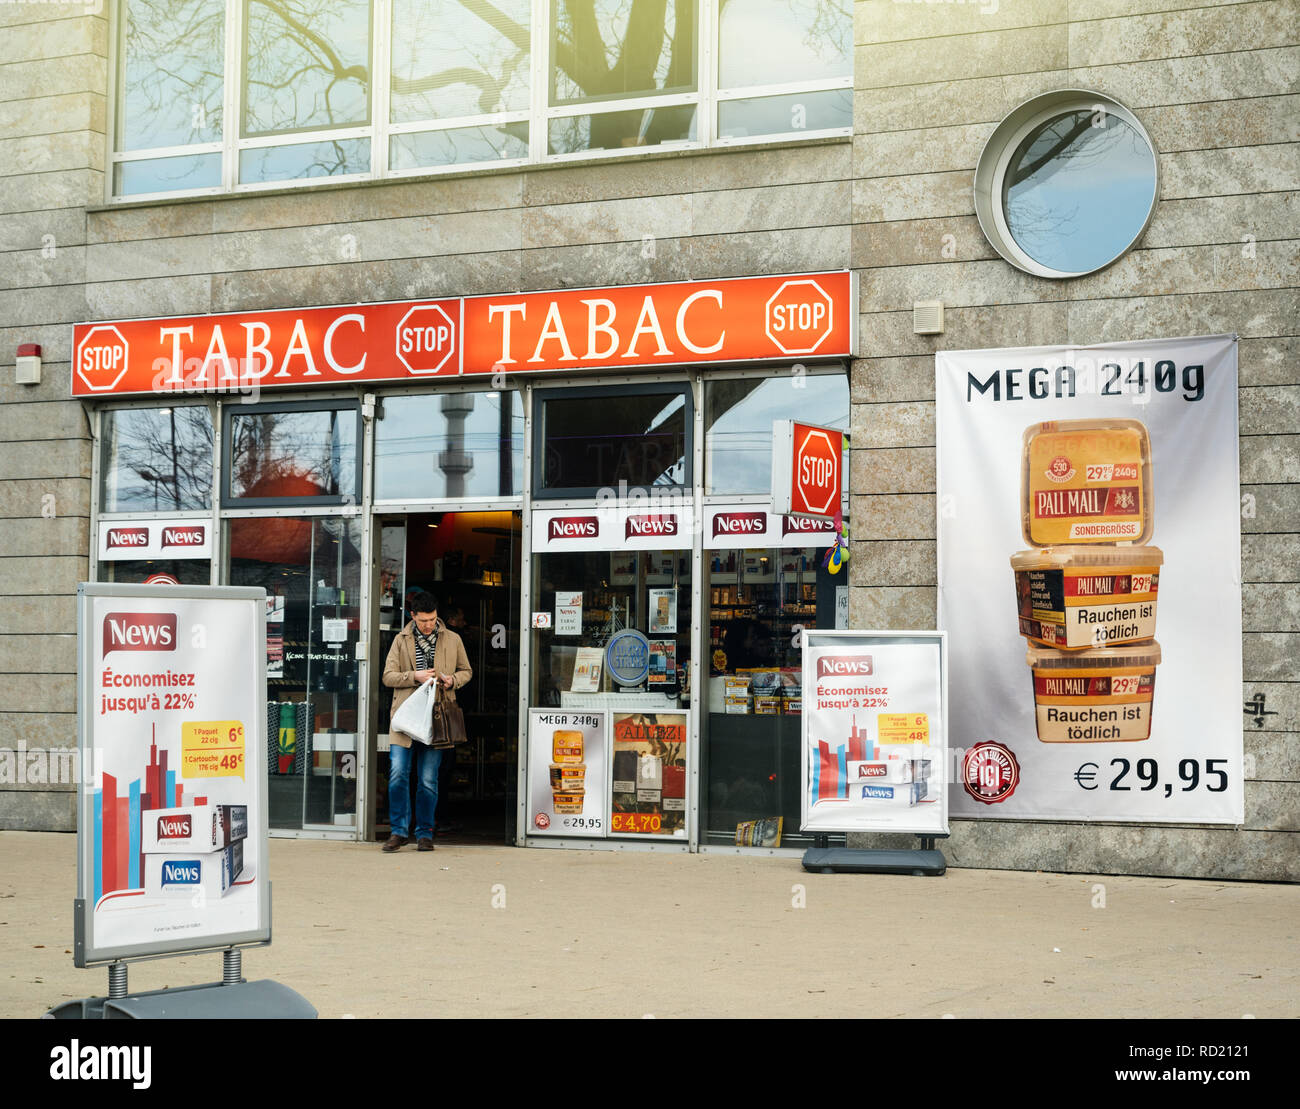 KEHL, GERMANY - MAR 29, 2018: Border shopping - man exit German taback shop offering cheaper than in France cigarettes and tobacco in city of Kehl, Germany 4 km from France Stock Photo